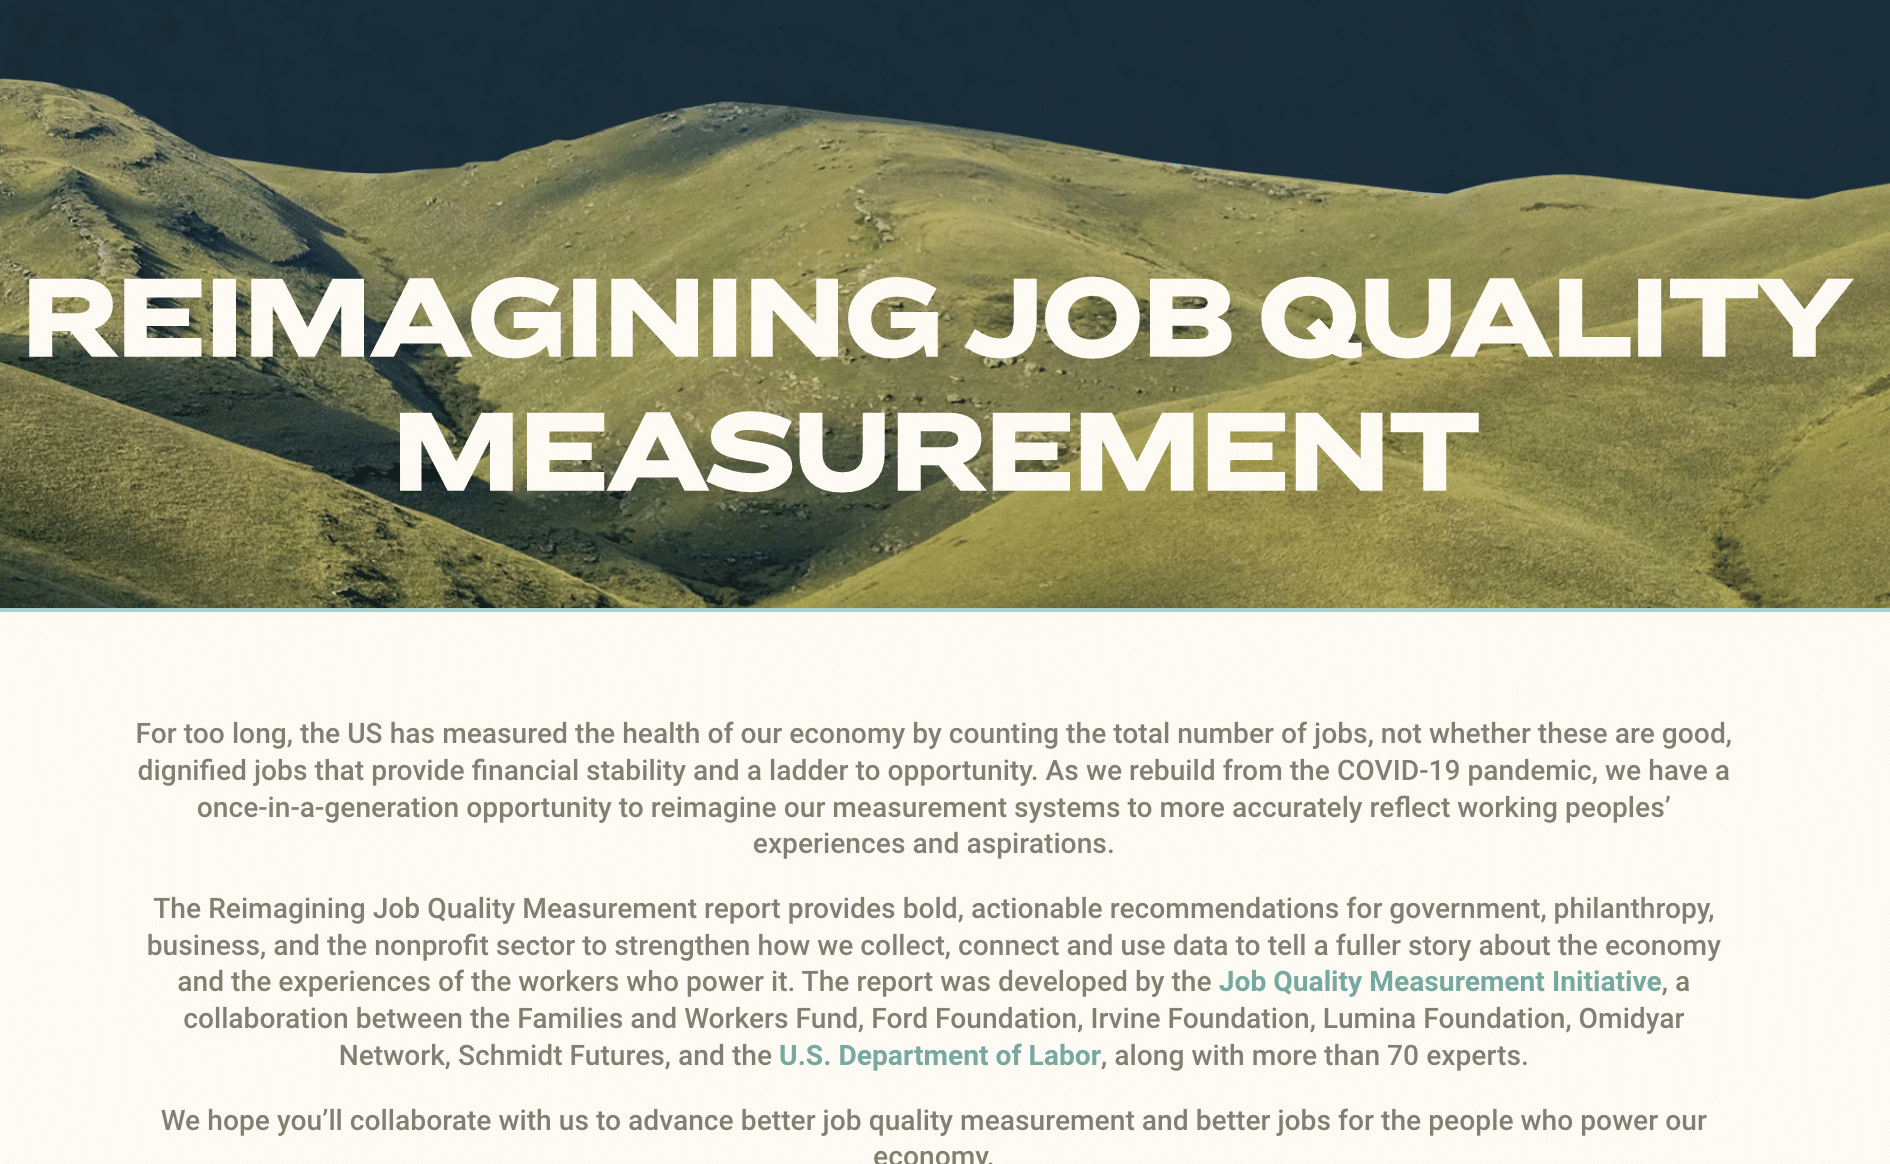 Reimagining Job Quality Measurement. For too long, the US has measured the health of the our economy by counting the total number of jobs, not whether these are good, dignified jobs that provide financial stability and a ladder to opportunity. As we rebuild from the COVID-19 pandemic, we have a once-in-a-generation opportunity to reimagine our measurement systems to more accurately reflect working peoples' experiences and aspirations. The Reimagining Job Quality Measurement report provides bold, actionable recommendations for governmnet, philanthropy, business, and